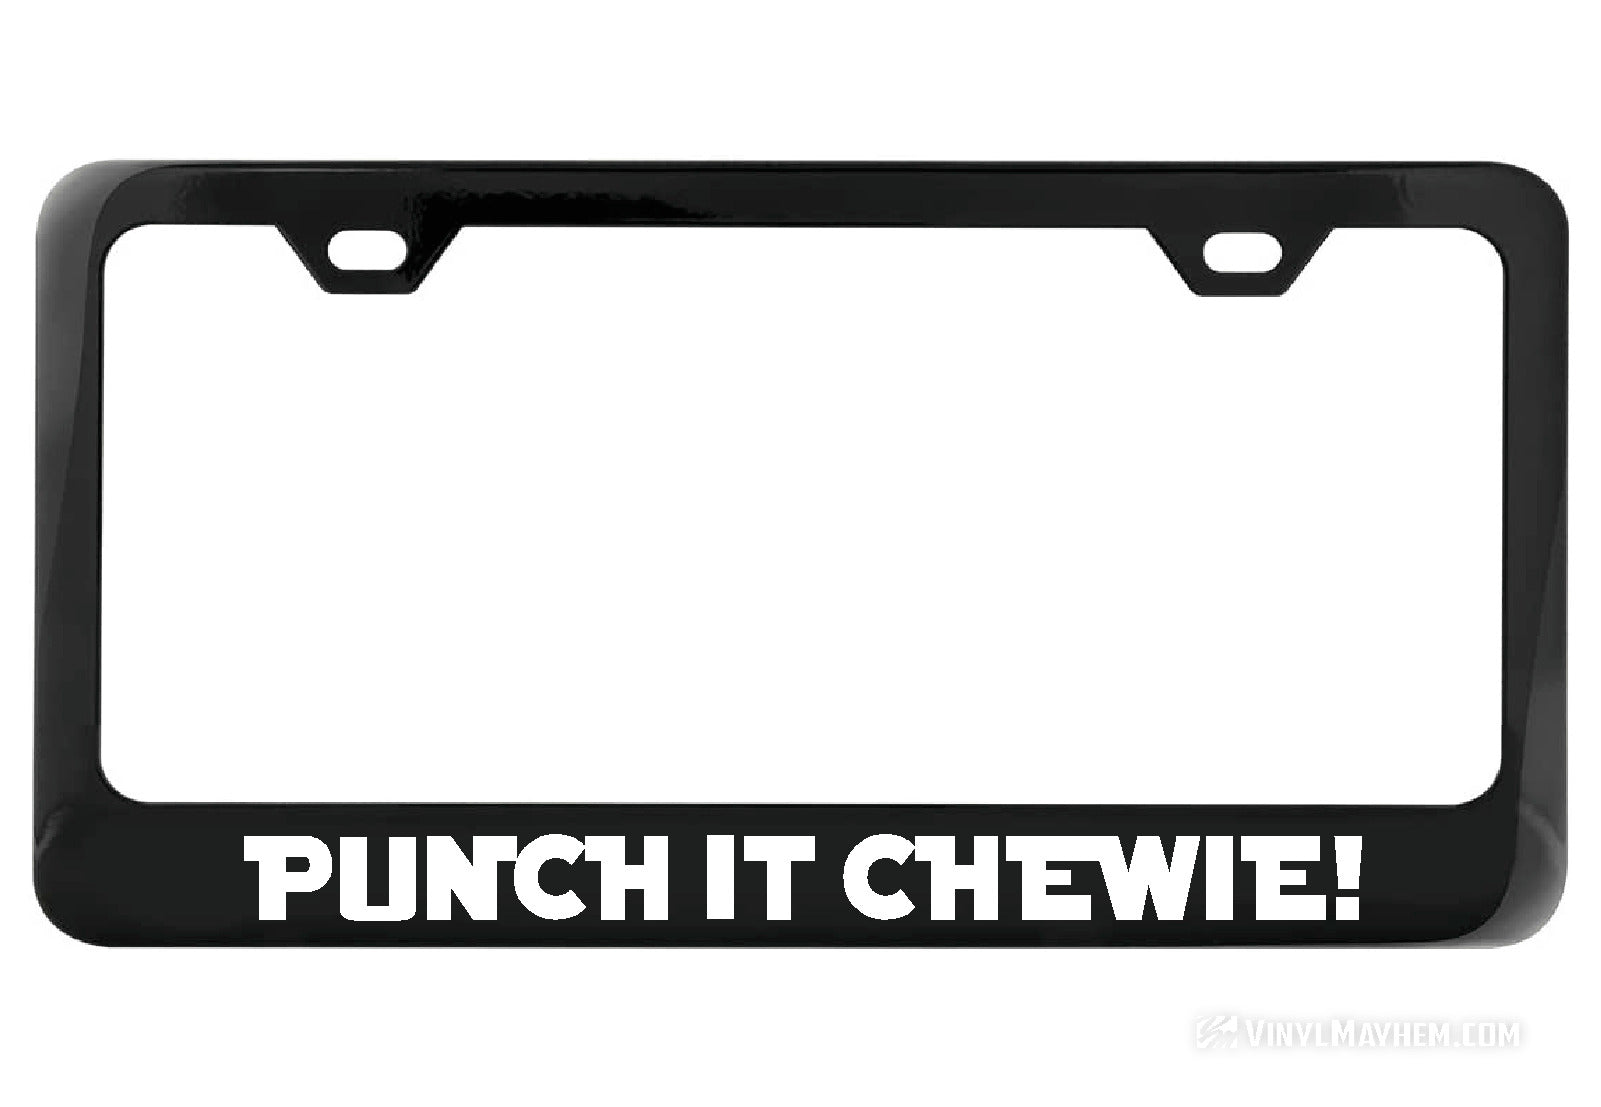 Punch It Chewie! black license plate frame